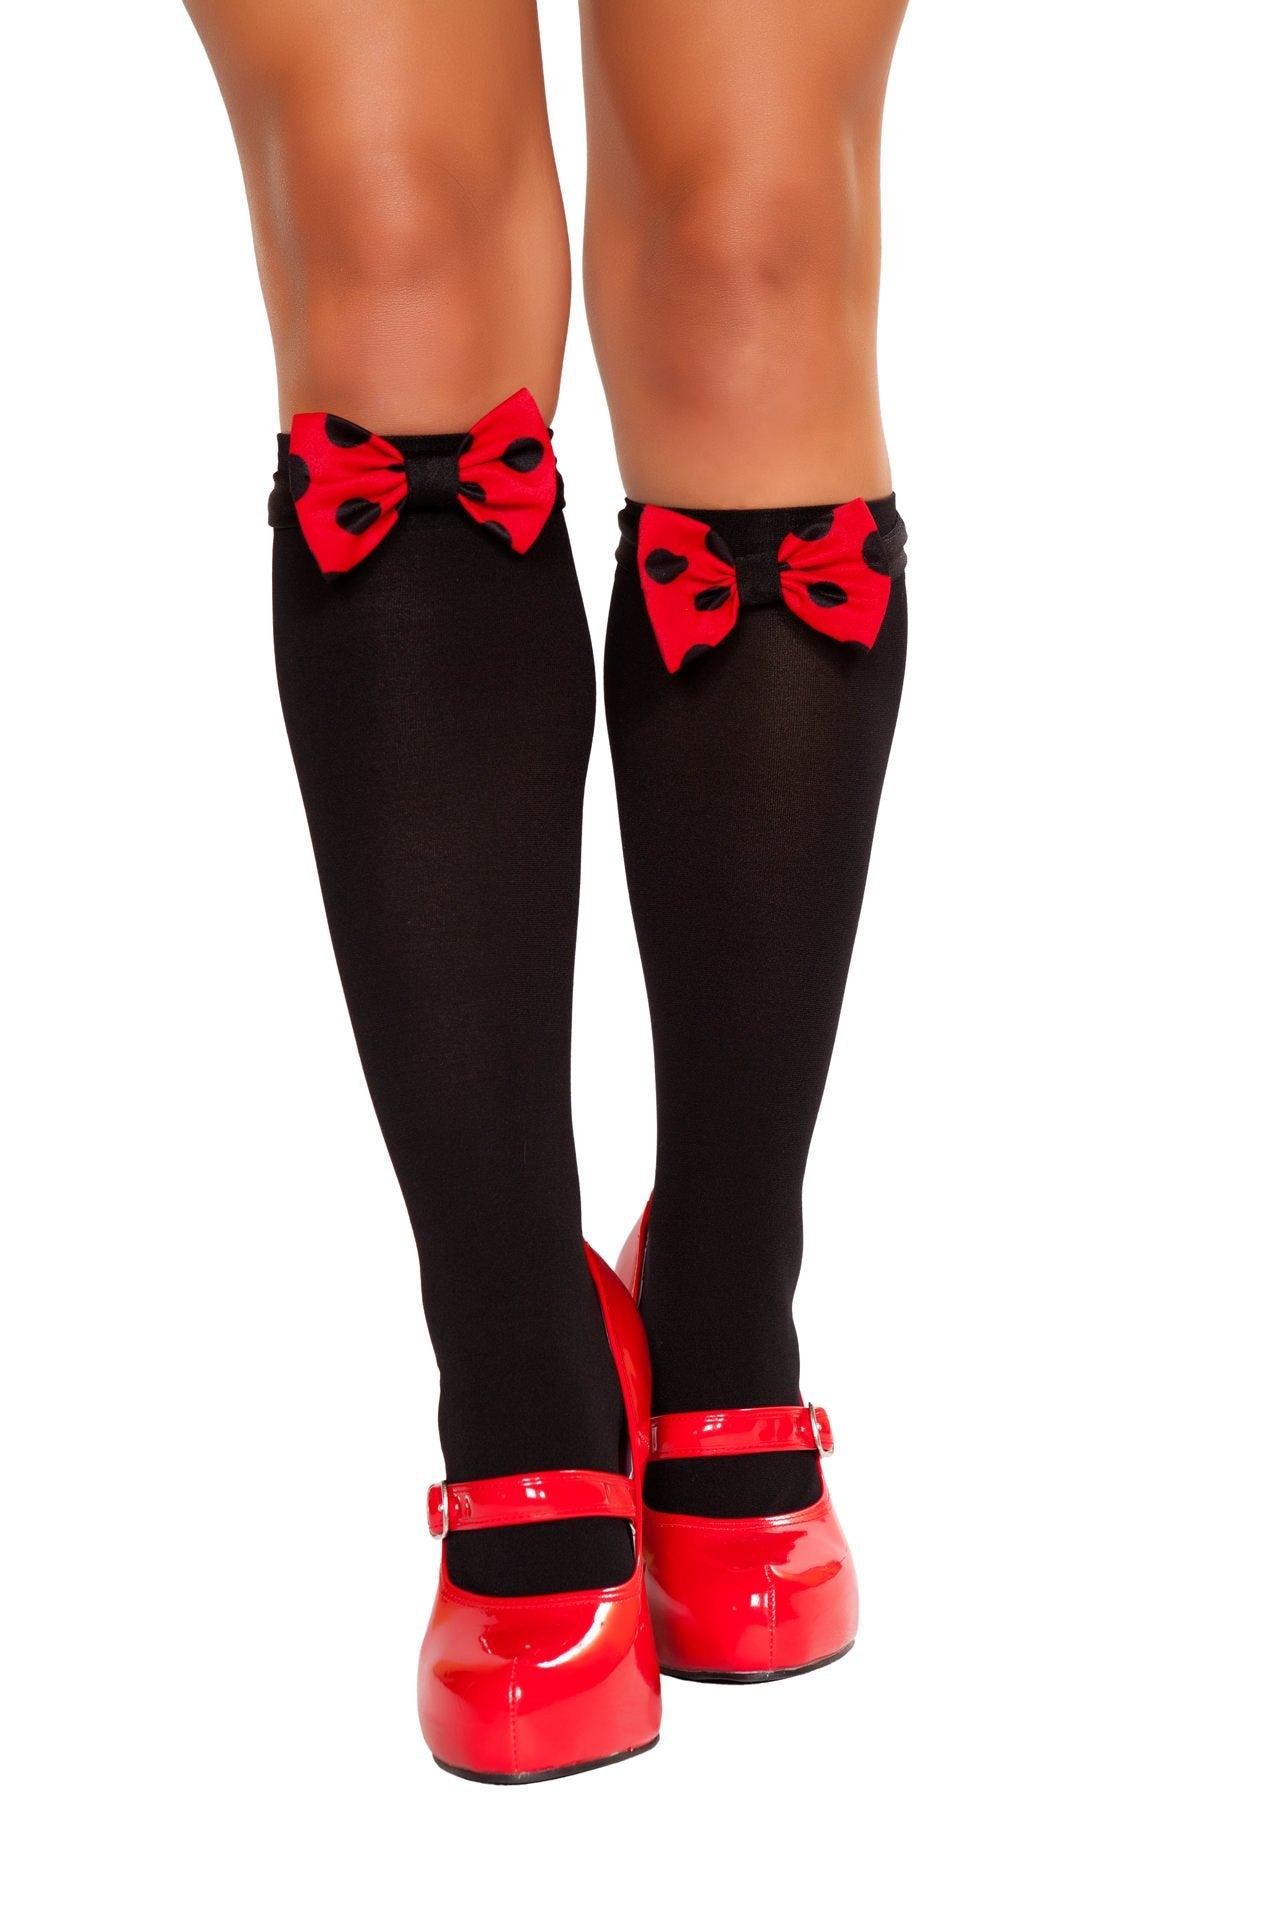 Roma Costume Accessories One Size / Red/Black 10091B - Mouse Bows for Stockings